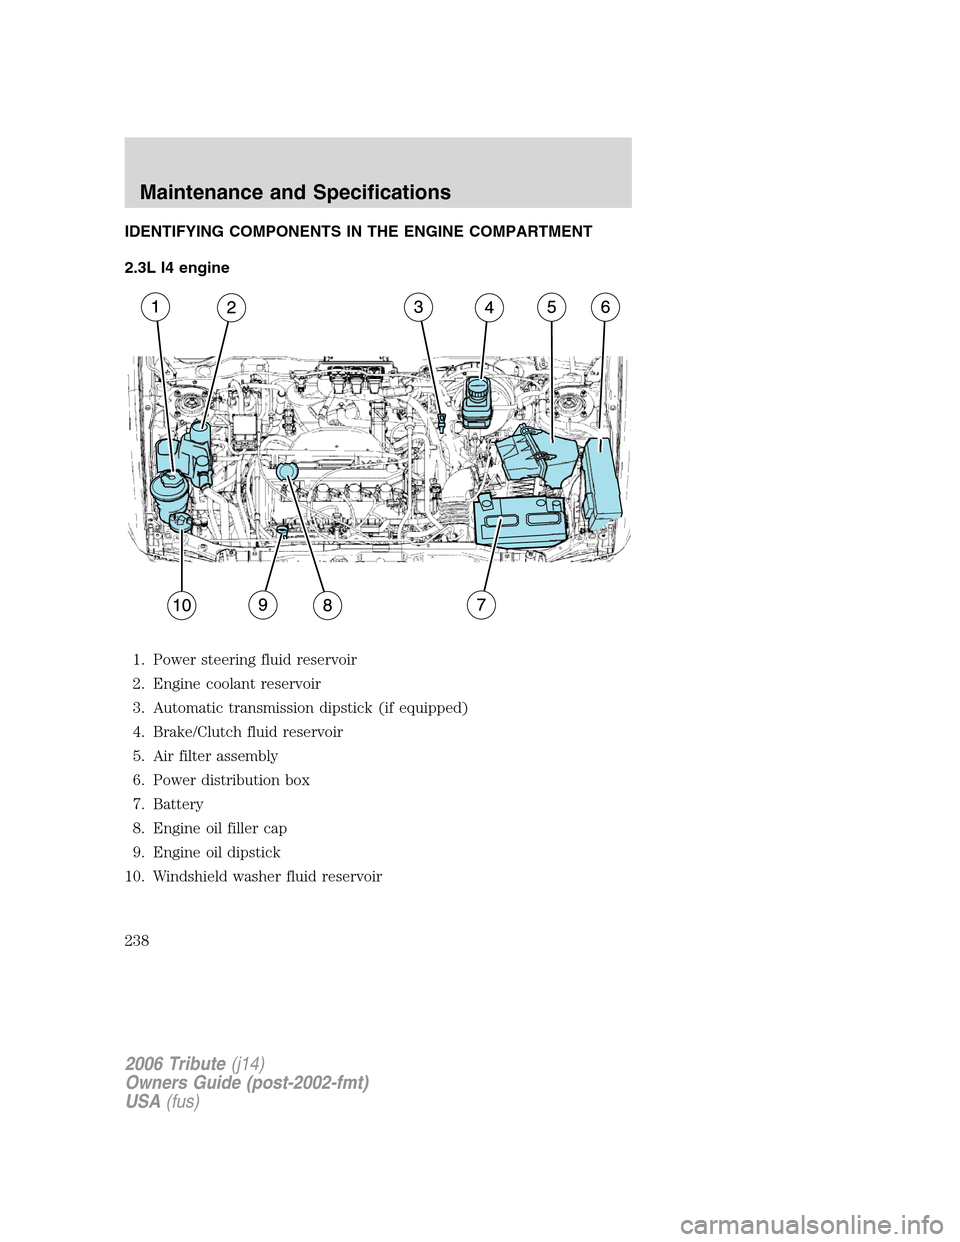 MAZDA MODEL TRIBUTE 2006  Owners Manual (in English) IDENTIFYING COMPONENTS IN THE ENGINE COMPARTMENT
2.3L I4 engine
1. Power steering fluid reservoir
2. Engine coolant reservoir
3. Automatic transmission dipstick (if equipped)
4. Brake/Clutch fluid res